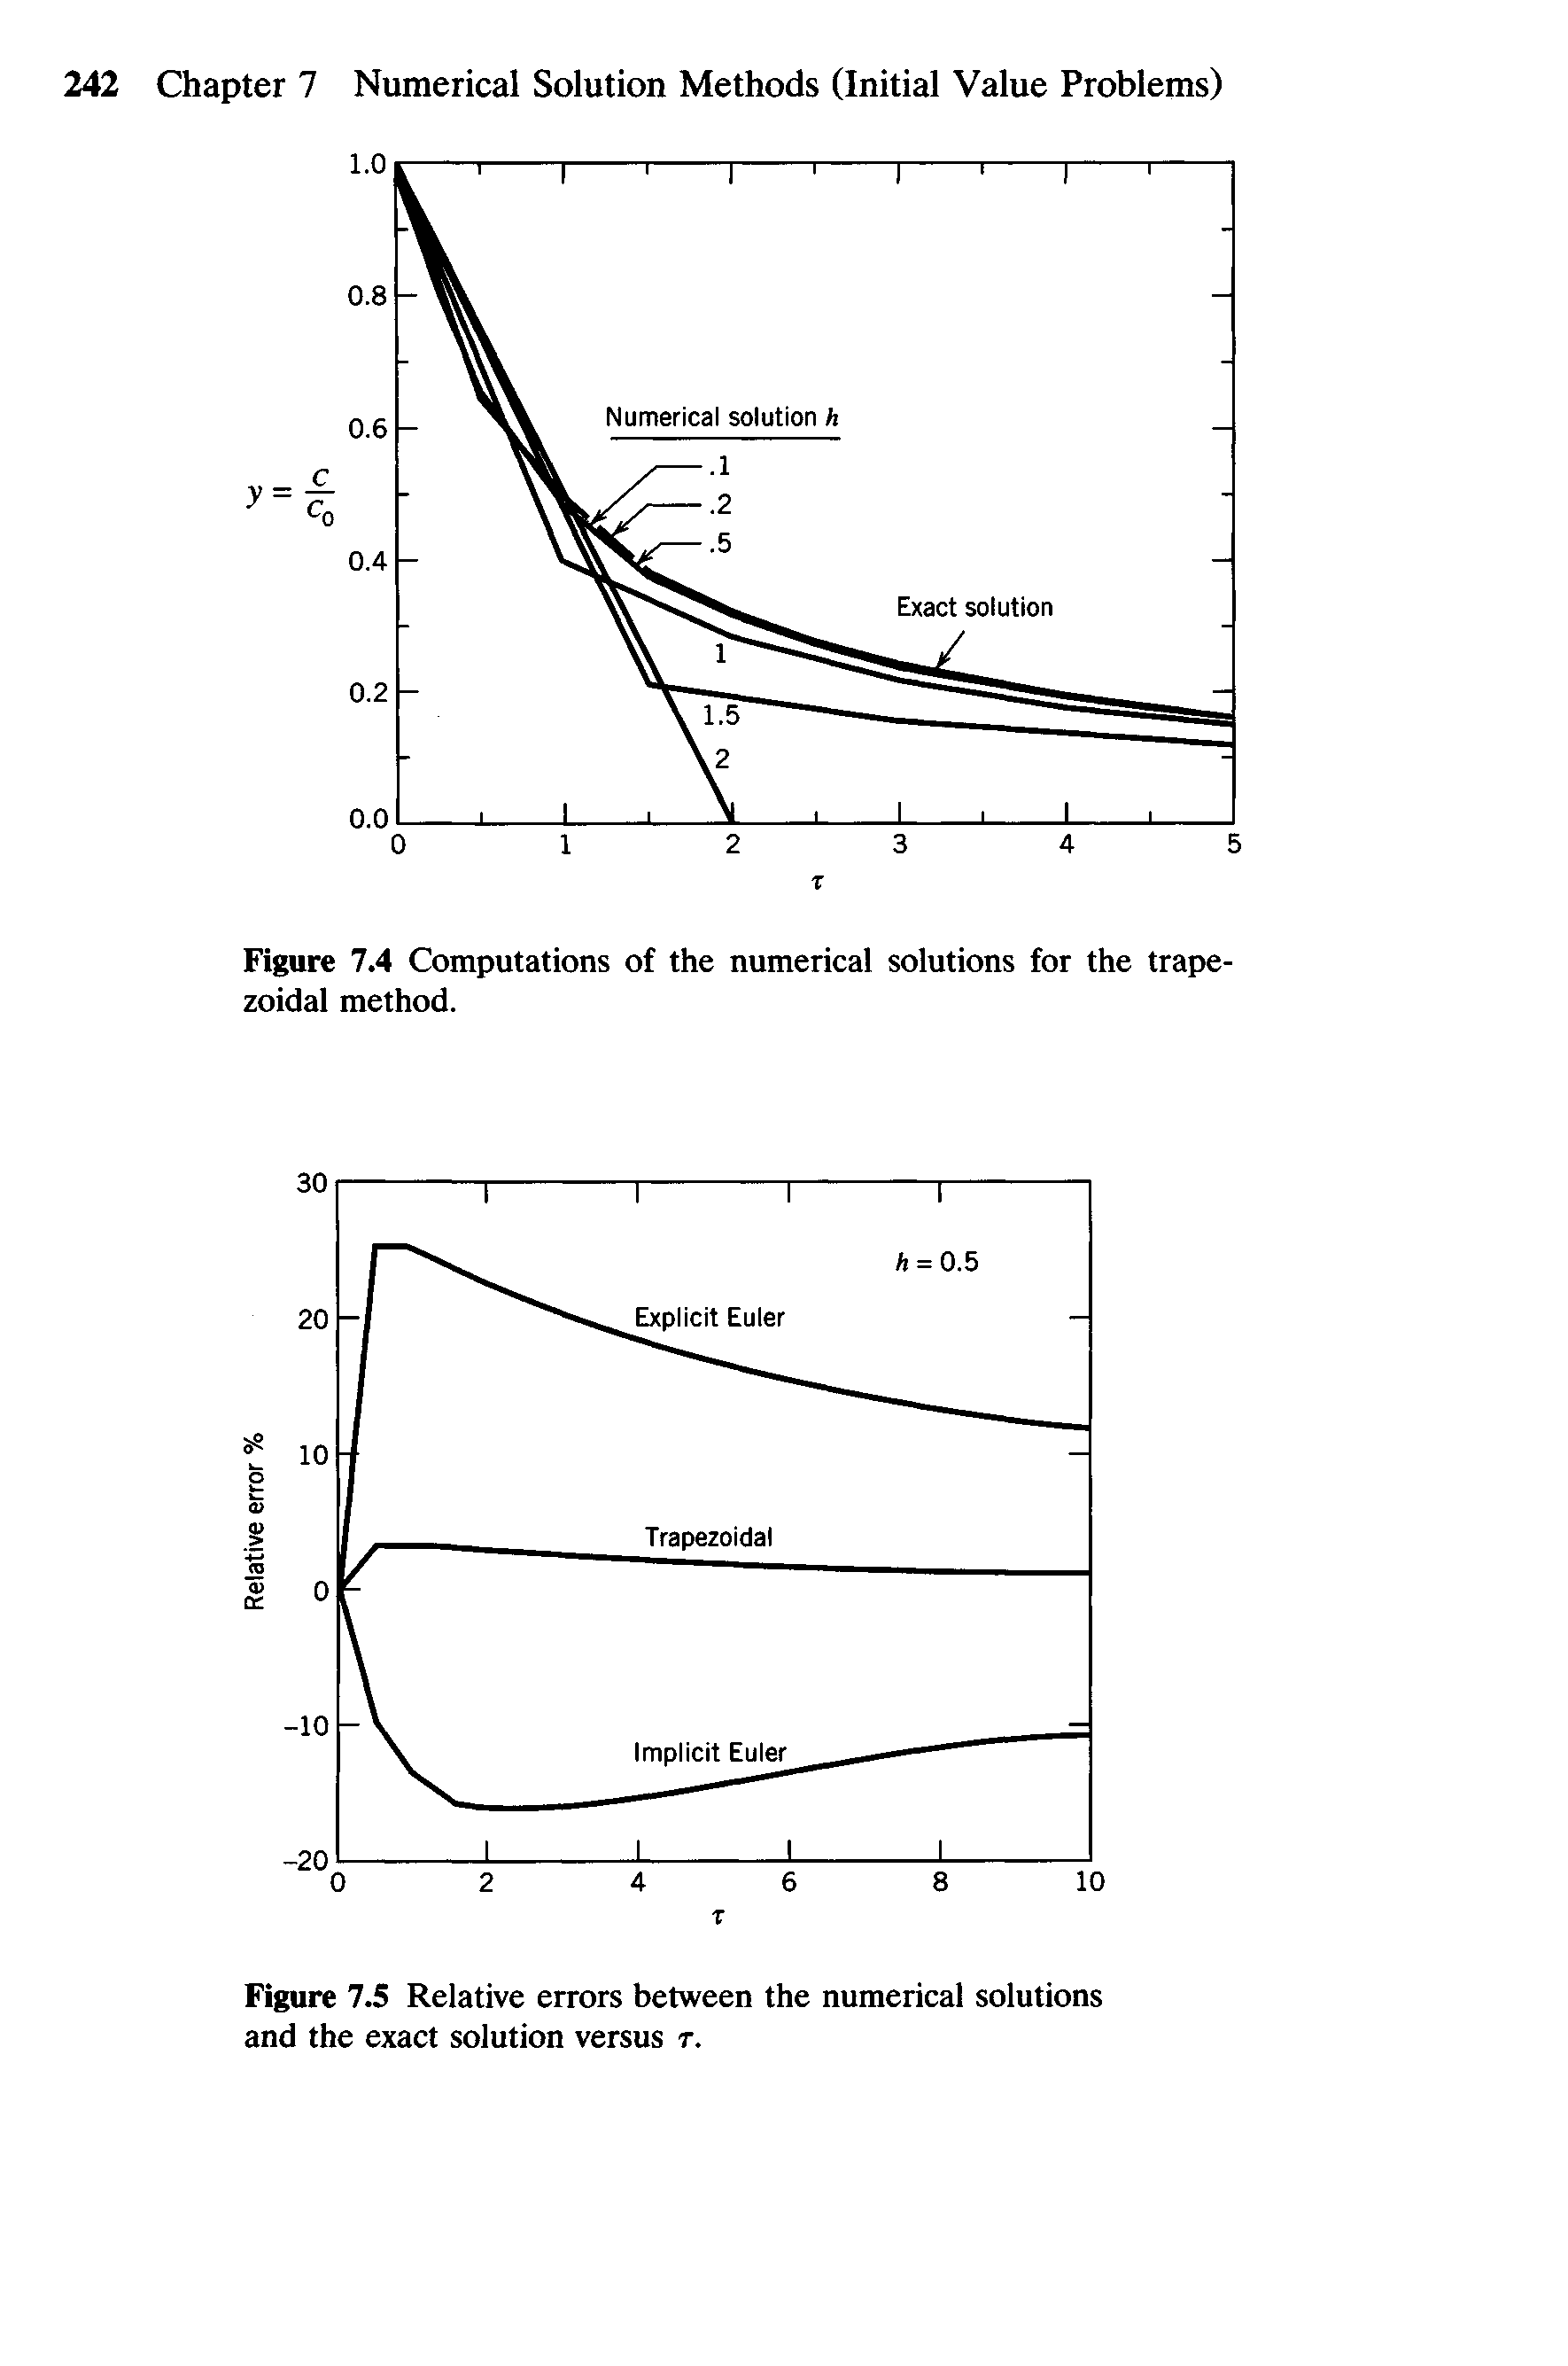 Figure 7.4 Computations of the numerical solutions for the trapezoidal method.